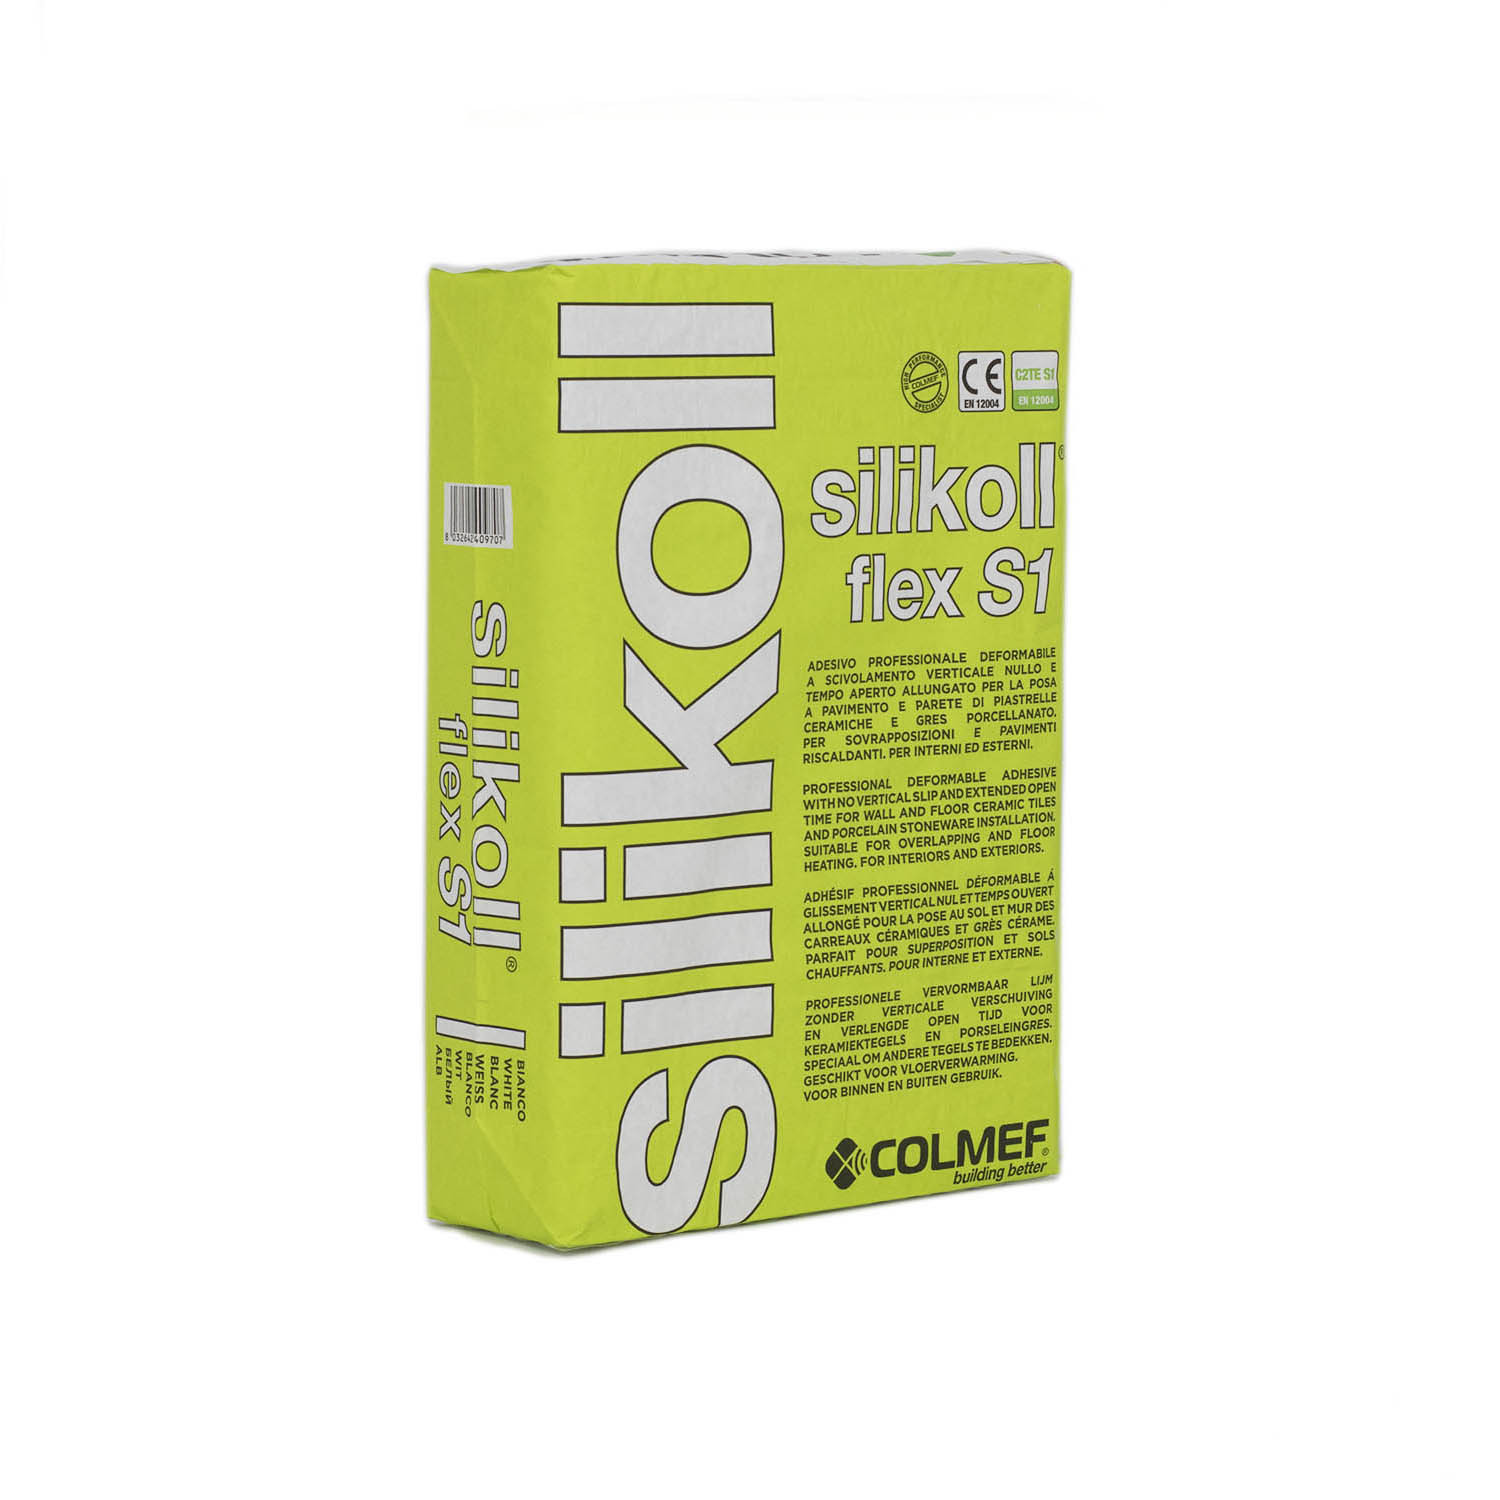 Silikoll Flex S1 C2TE glue with 1 bag you can install 6 square meters
